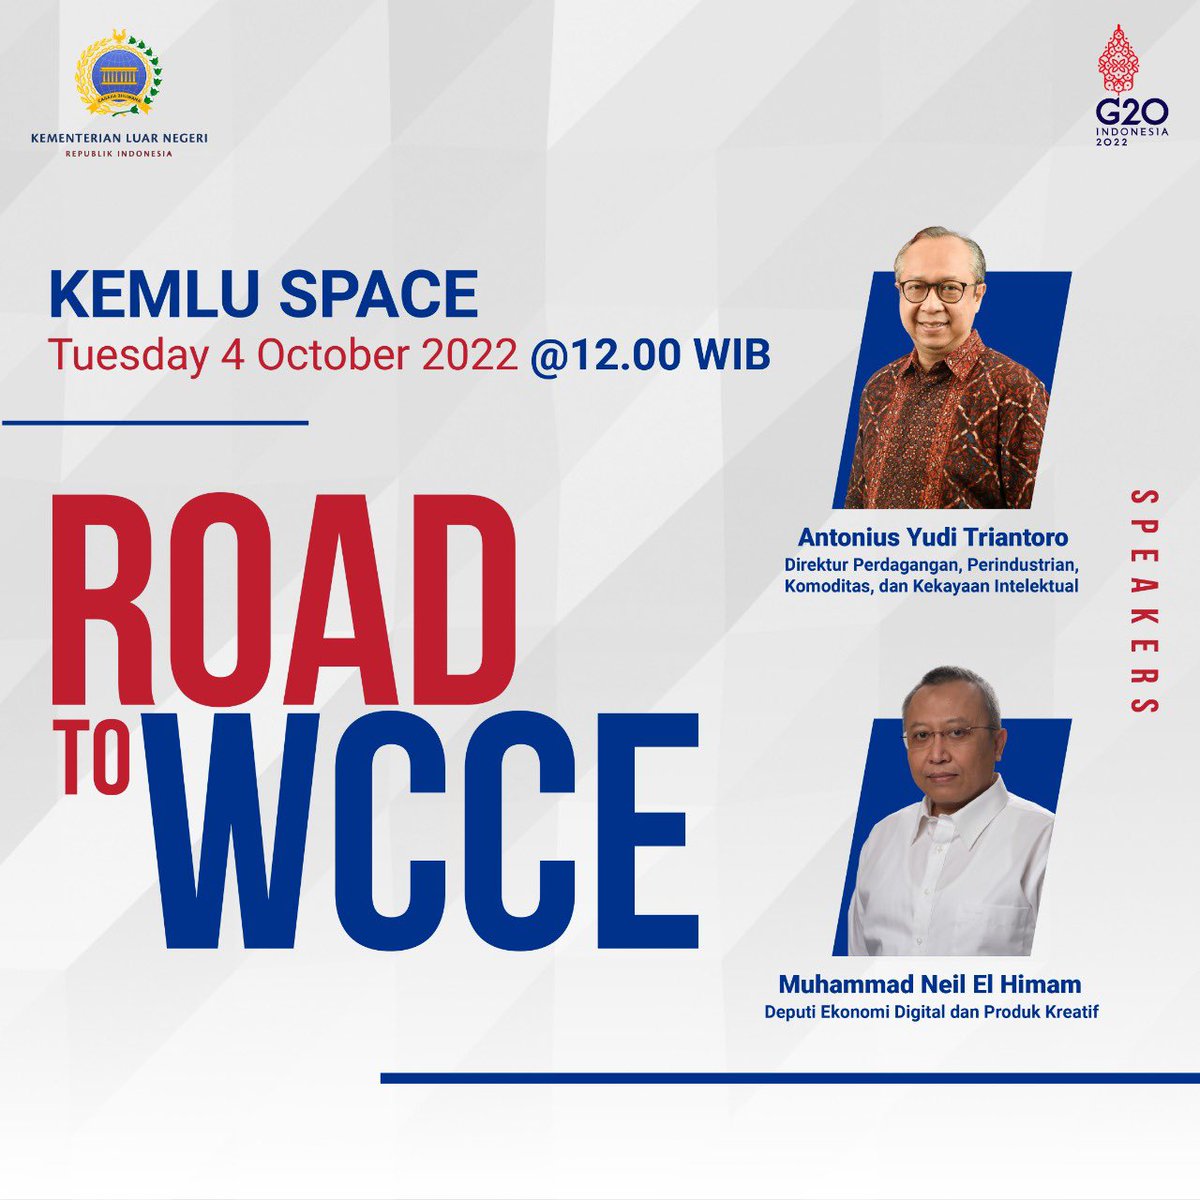 #Diplomates, the first episode of #KemluSpace will air tomorrow 4/10 at 12PM, this episode talks about the 3rd #WCCE in Bali 5-7/10 hosted by 🇮🇩, highlighting the importance of integrating the Creative Economy into the global economic recovery. Join us to hear more!